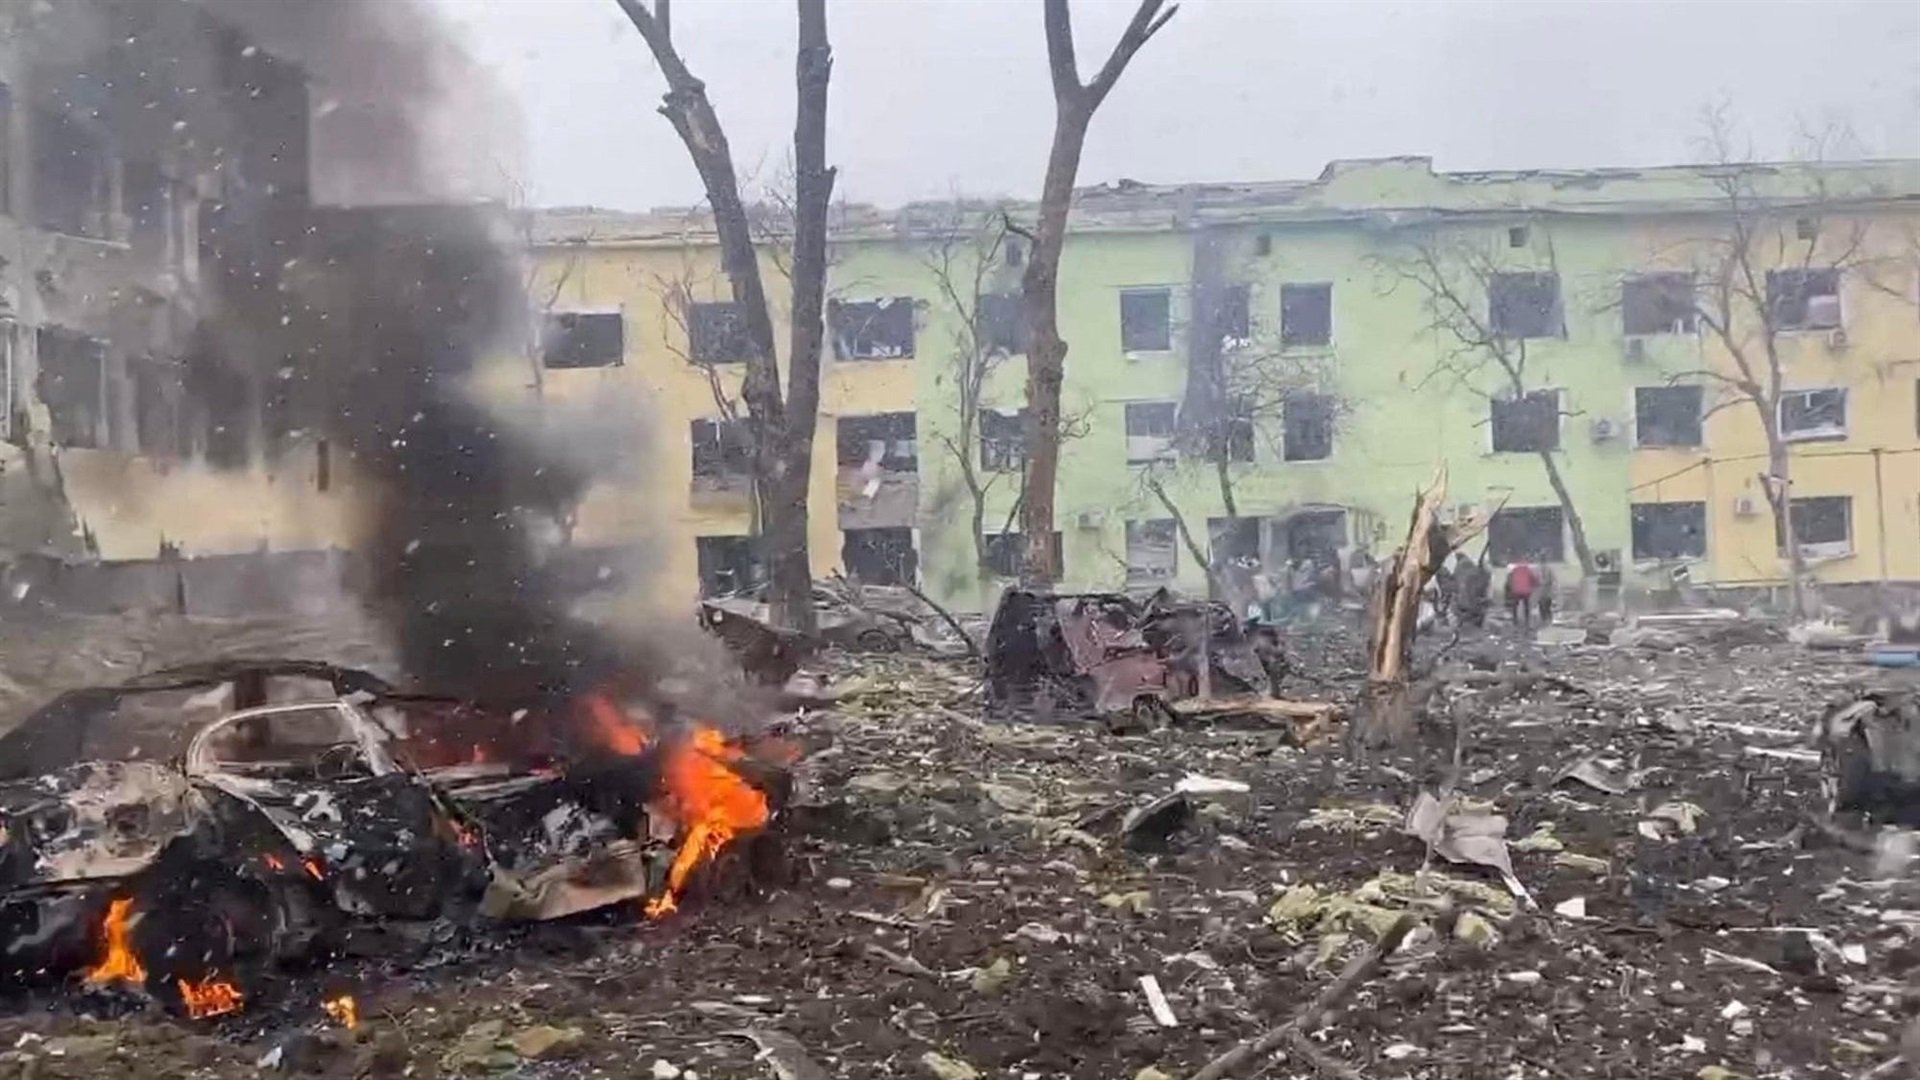 A view shows cars and a building of a hospital destroyed by an aviation strike in Mariupol, Ukraine, in this handout picture released March 9, 2022.